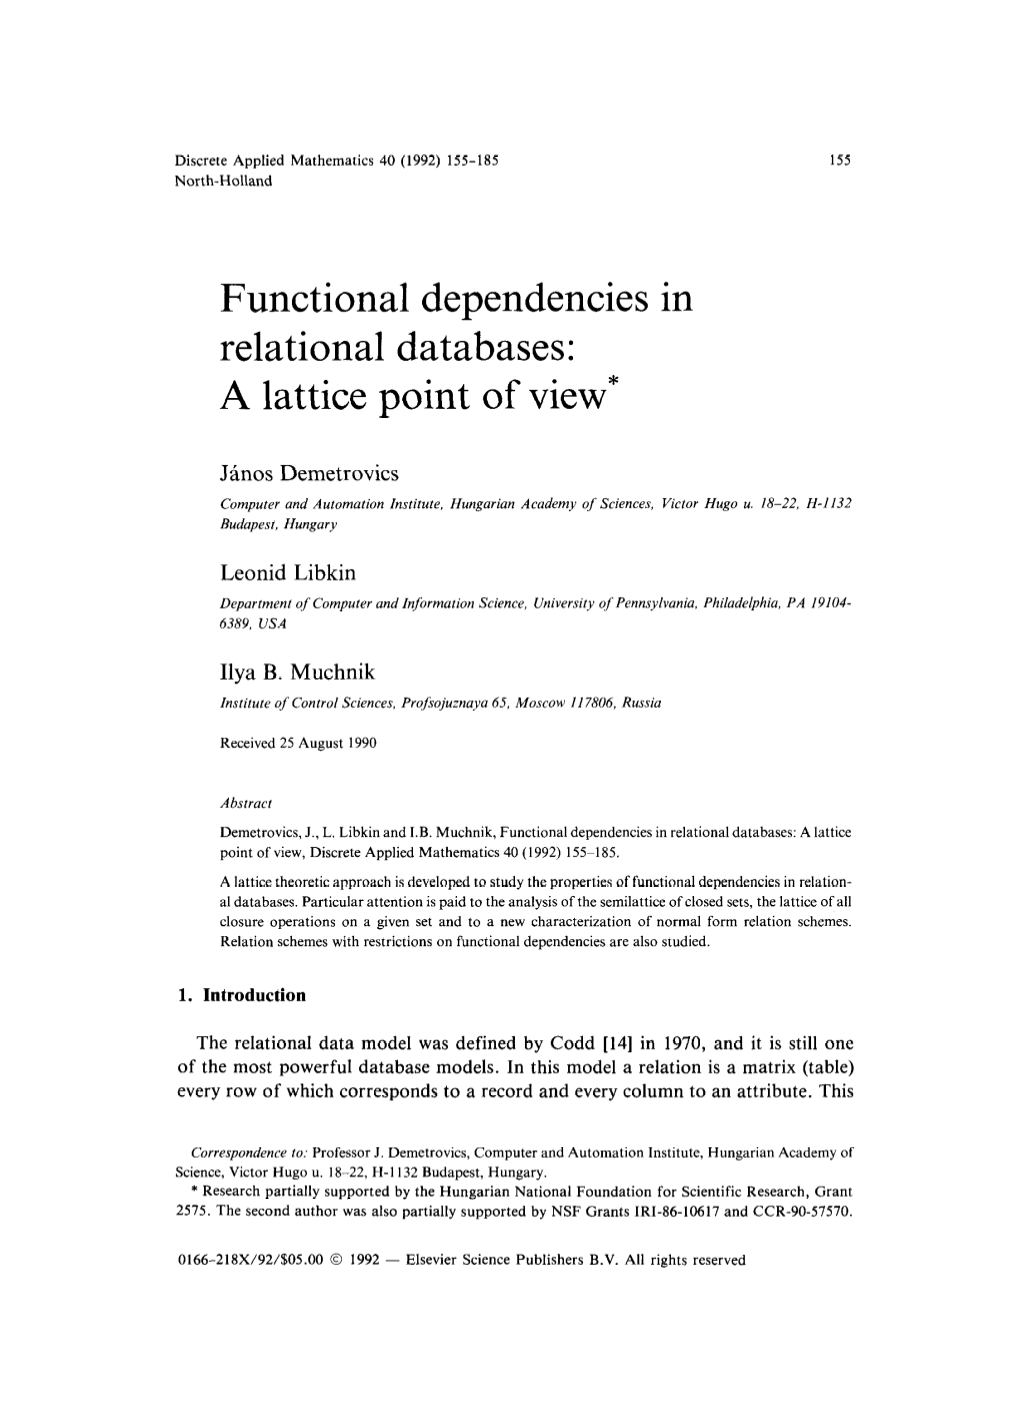 Functional Dependencies in Relational Databases: a Lattice Point of View*